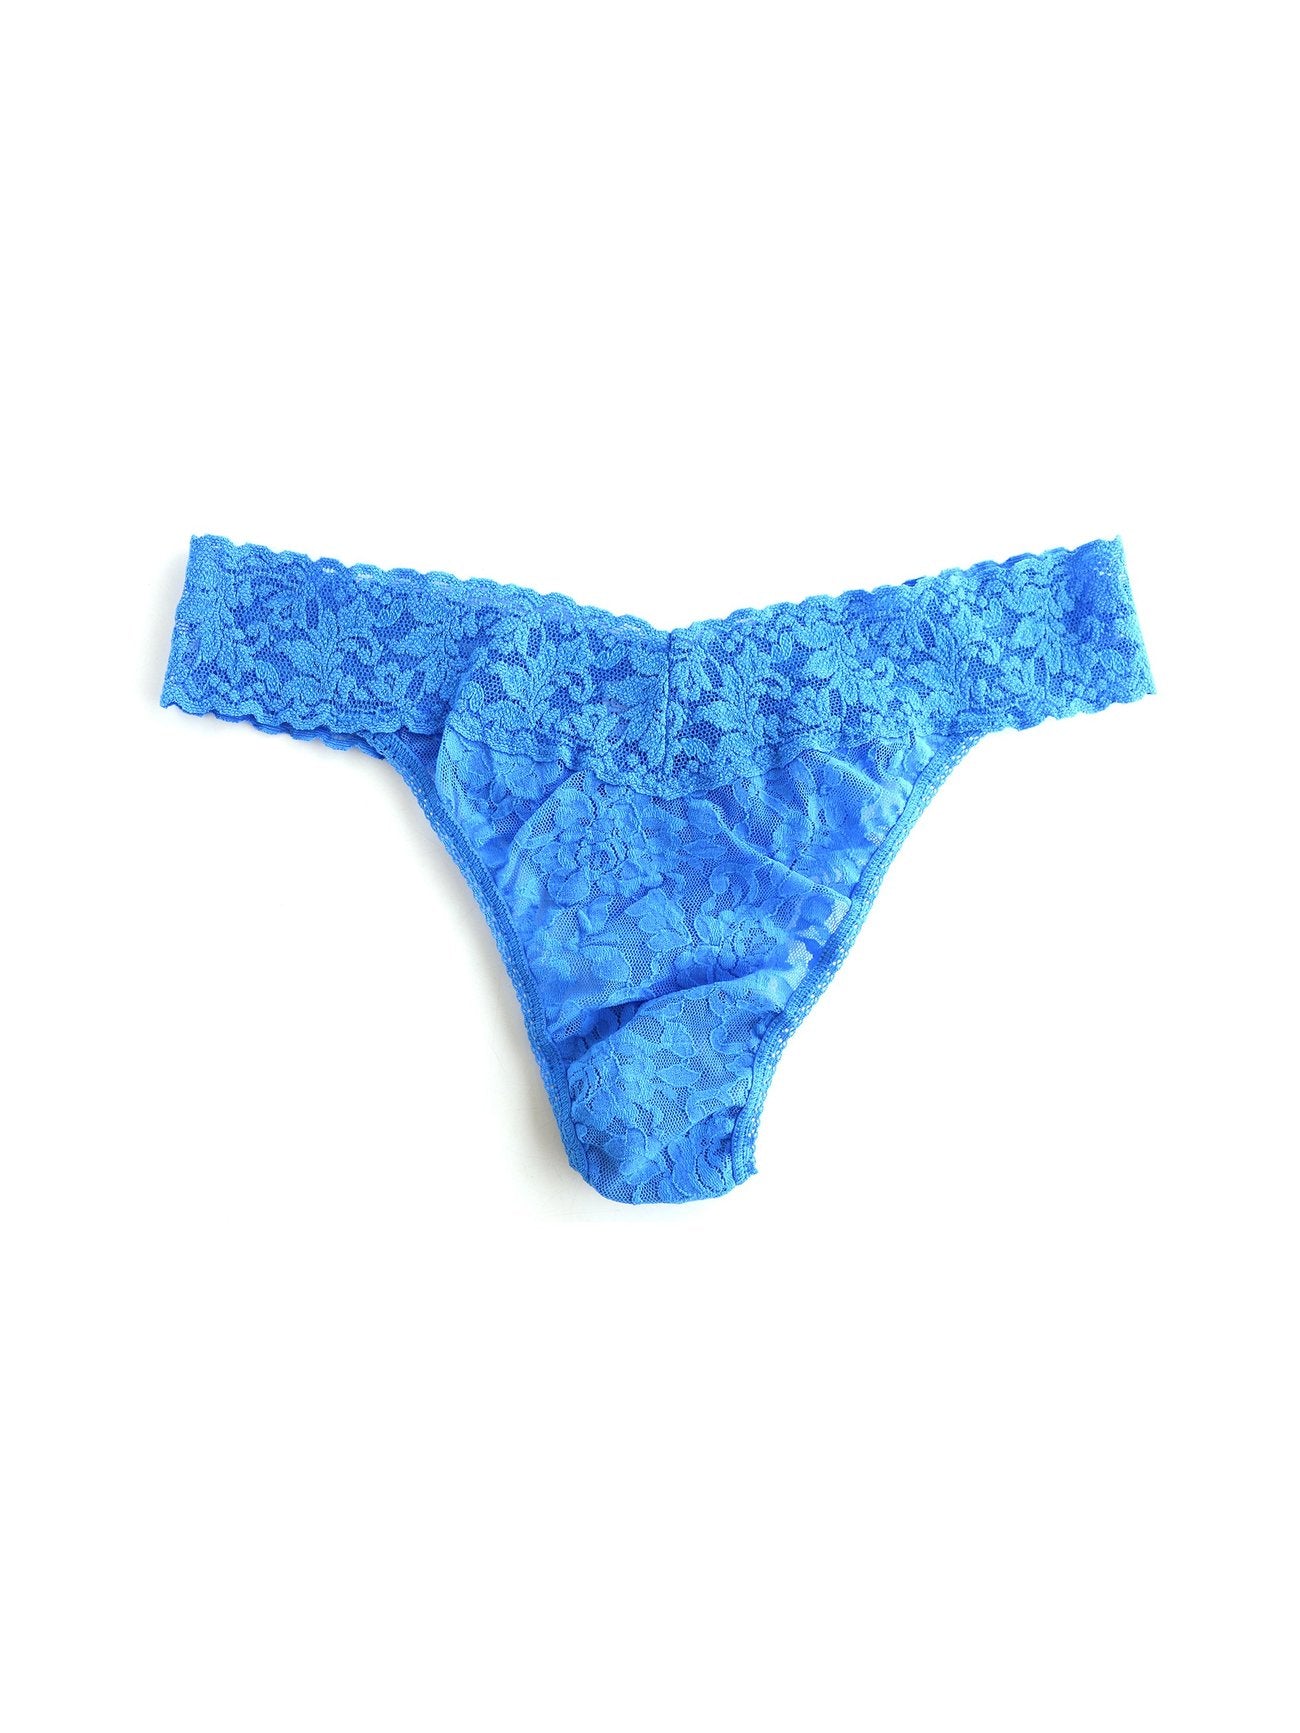 Hanky Panky Signature Lace Original Rise Thong-Packaged 4811p